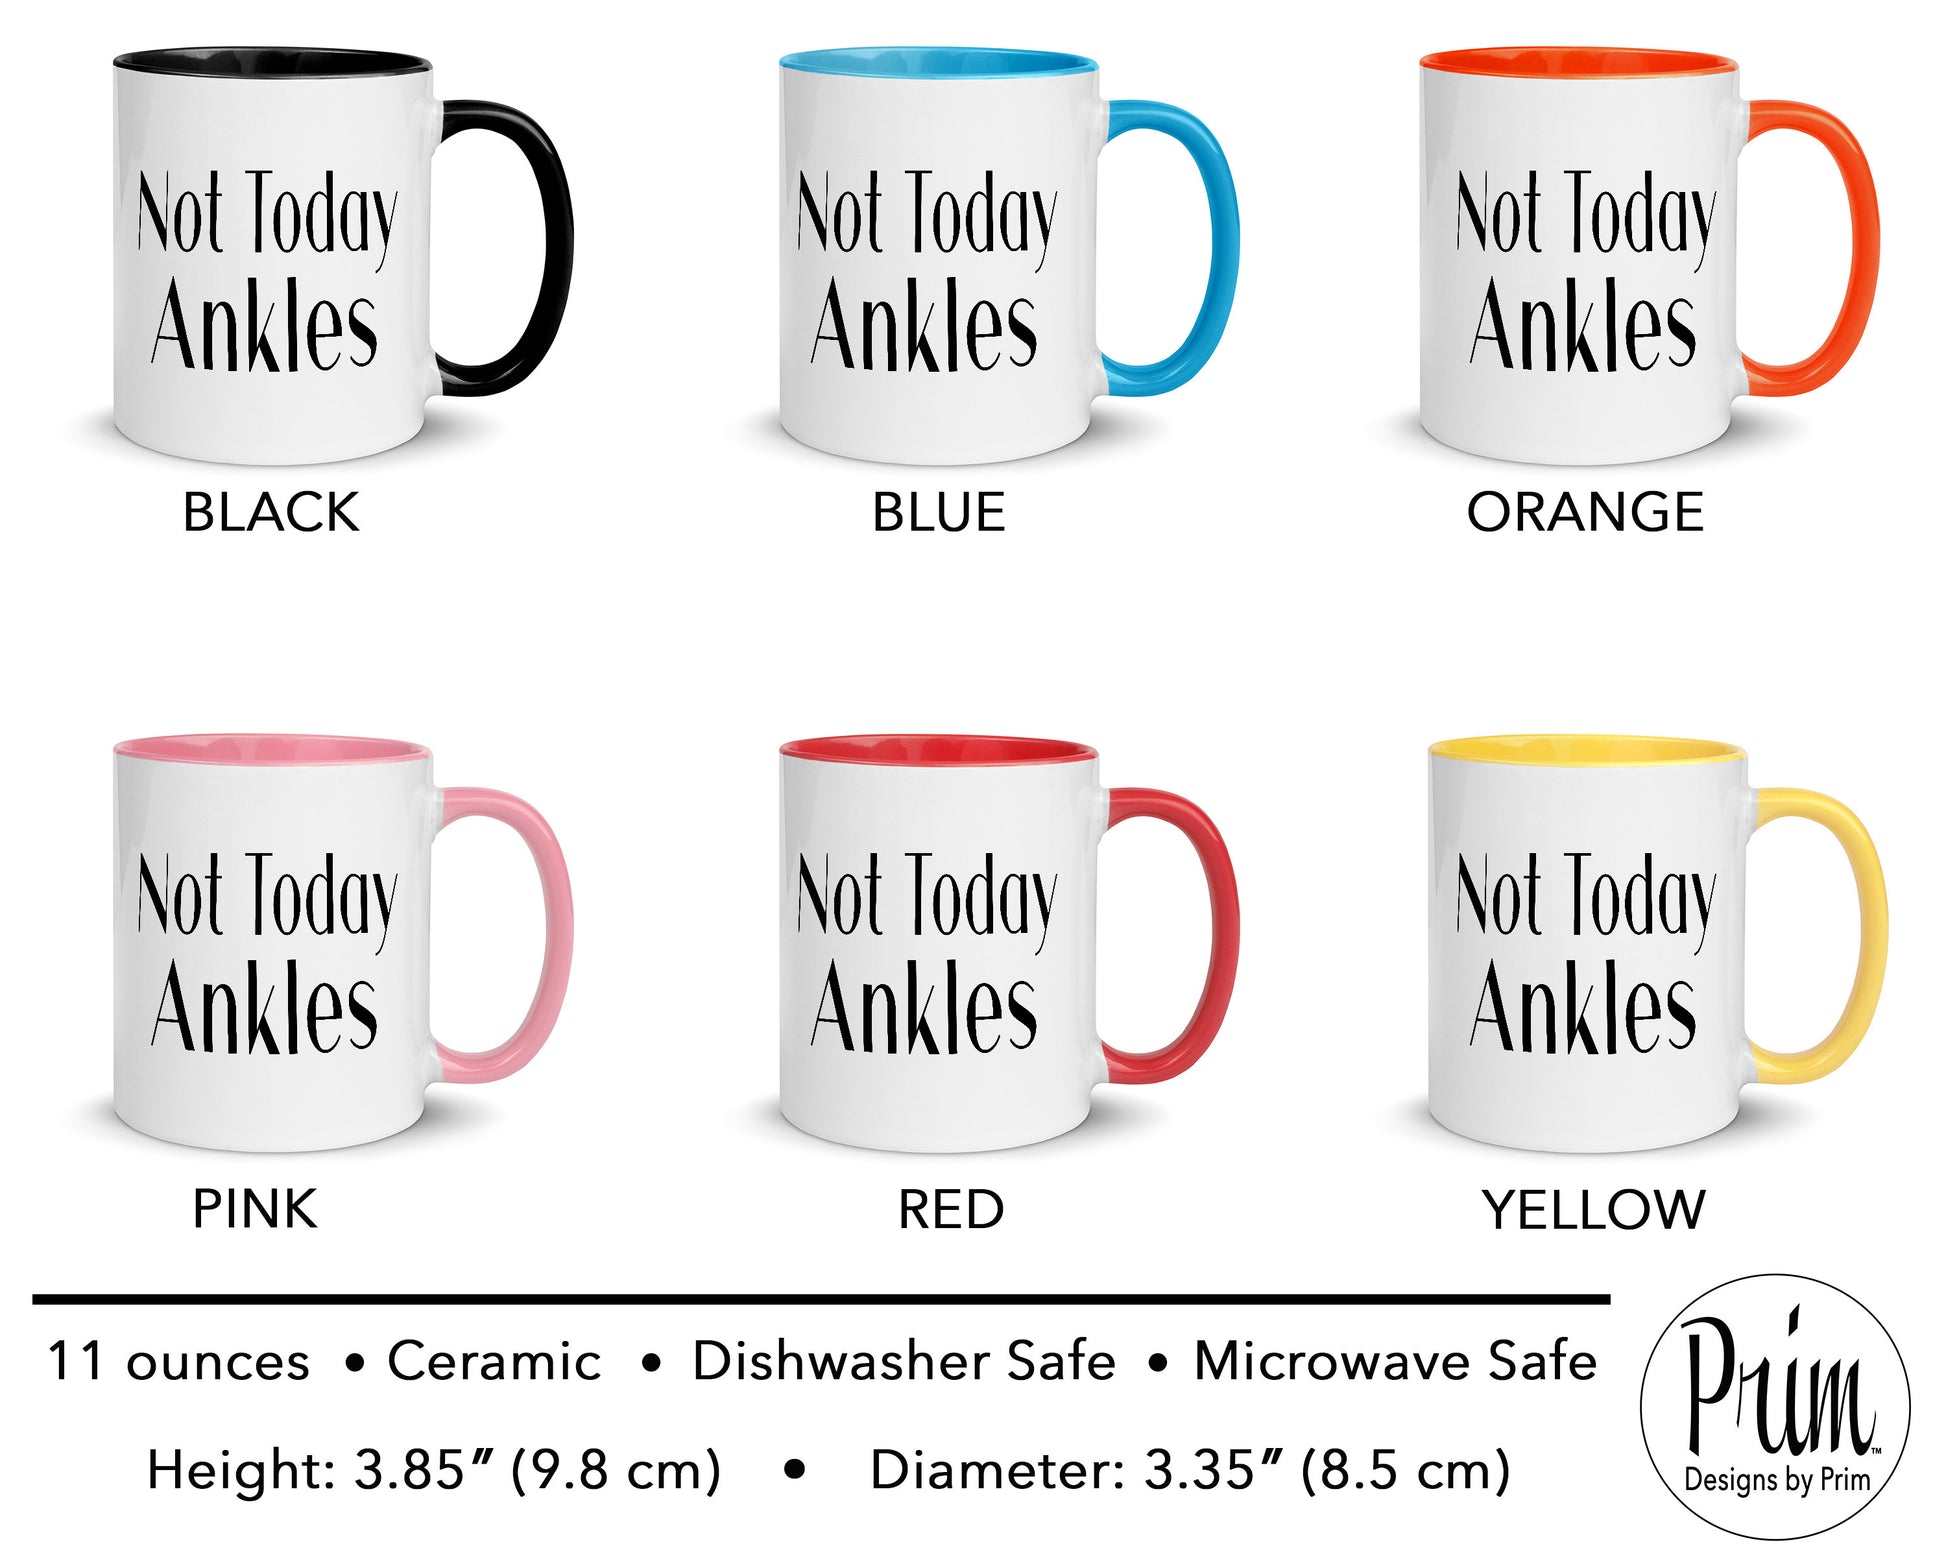 Designs by Prim Not Today Ankles Funny Candiace Dillard Basset 11 Ounce Ceramic Mug | RHOP Real Housewives of Potomac Bravo Fan Franchise Tea Cup